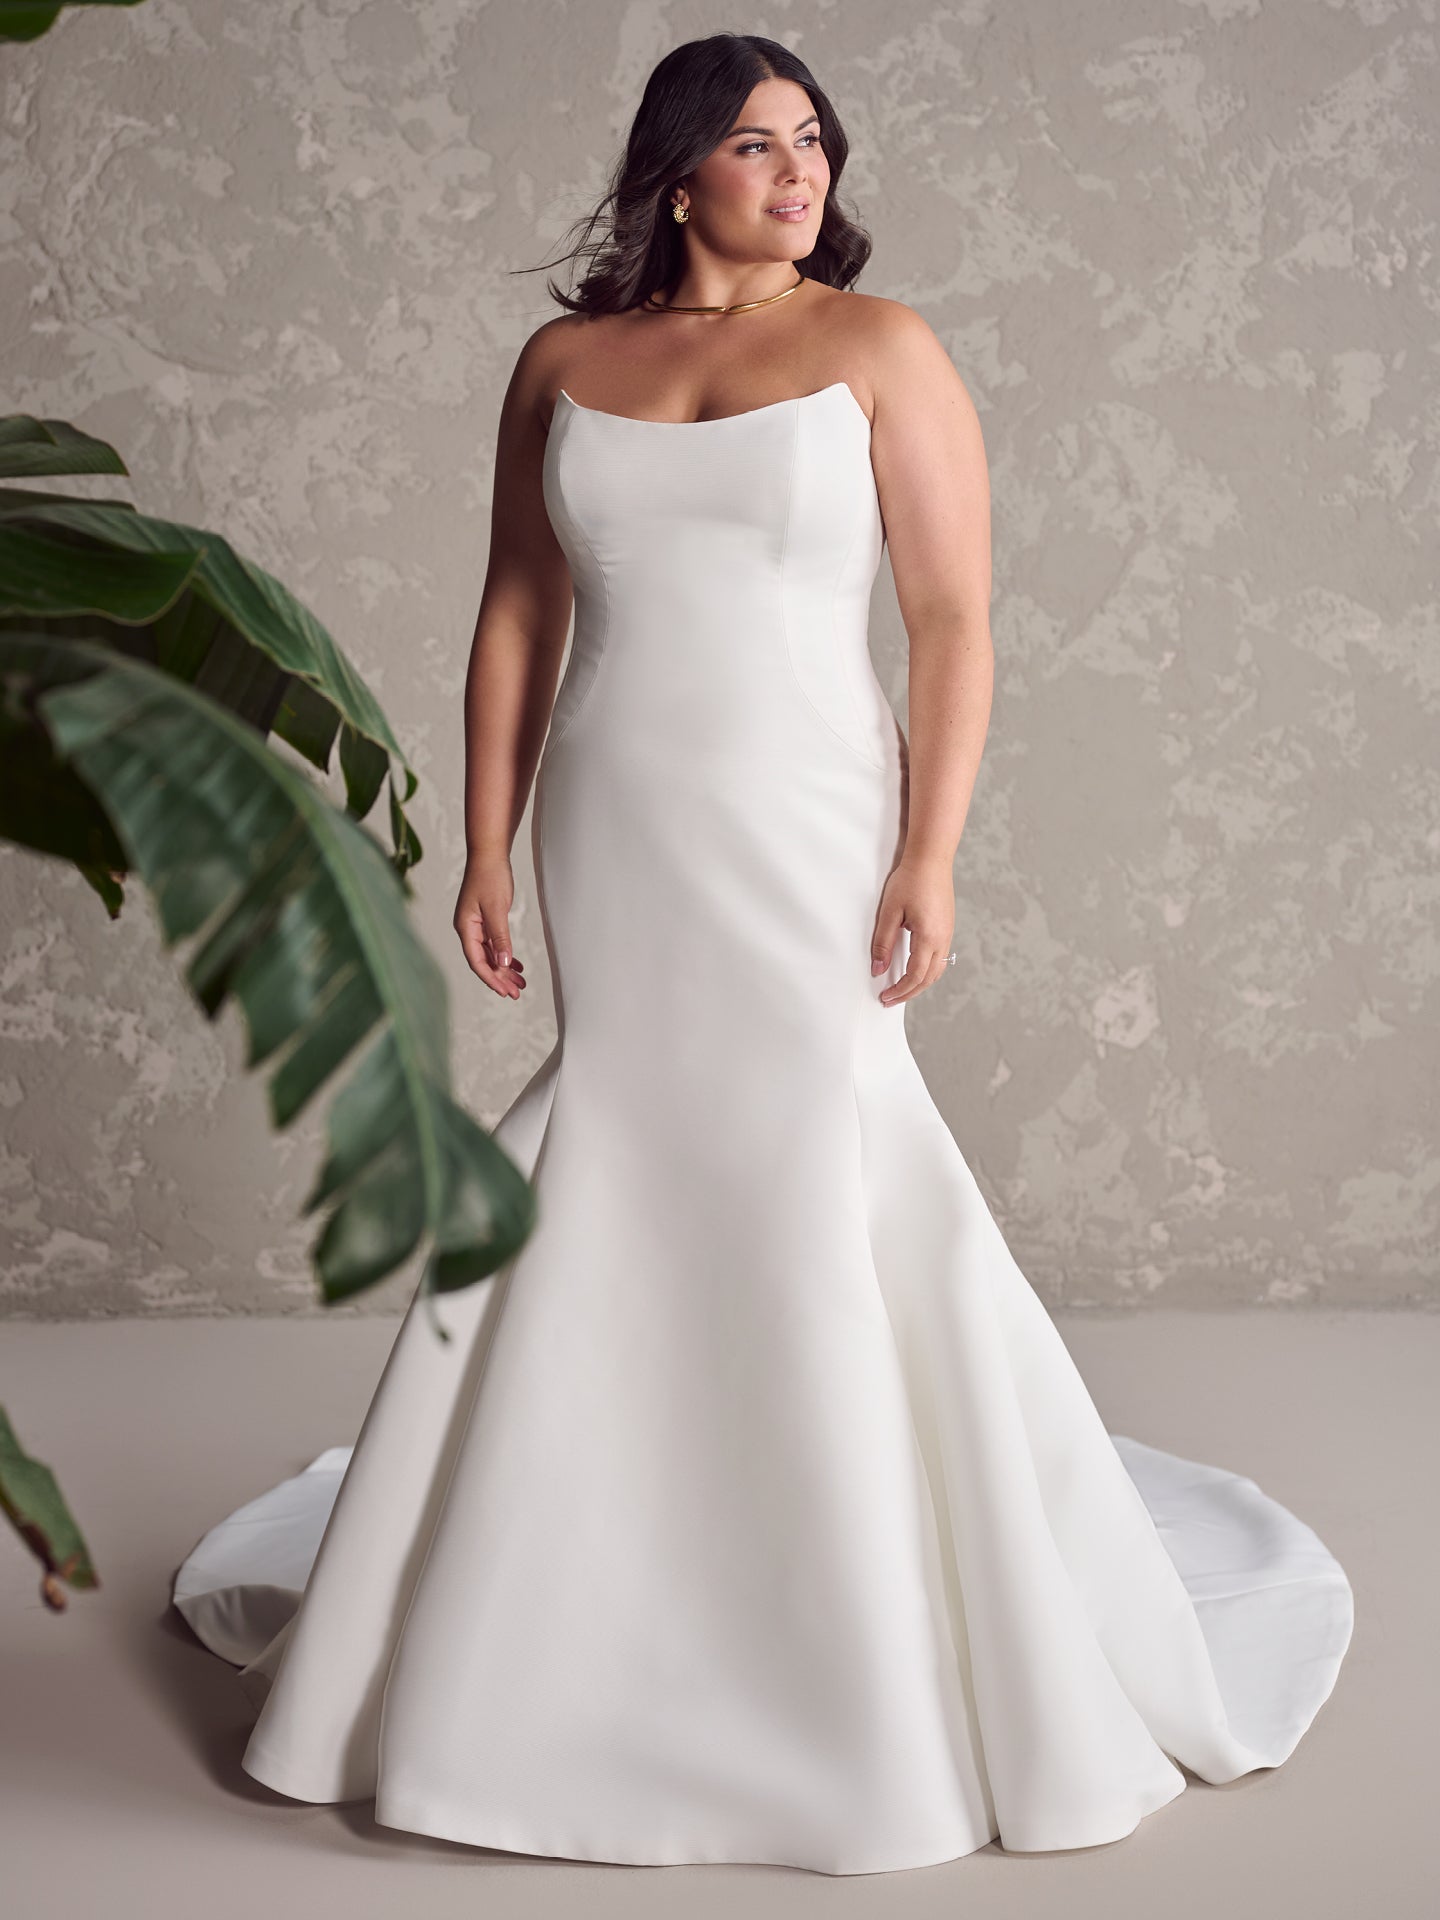 Chic And Simple Fit-and-Flare Gown With Buttons by Maggie Sottero - Image 1